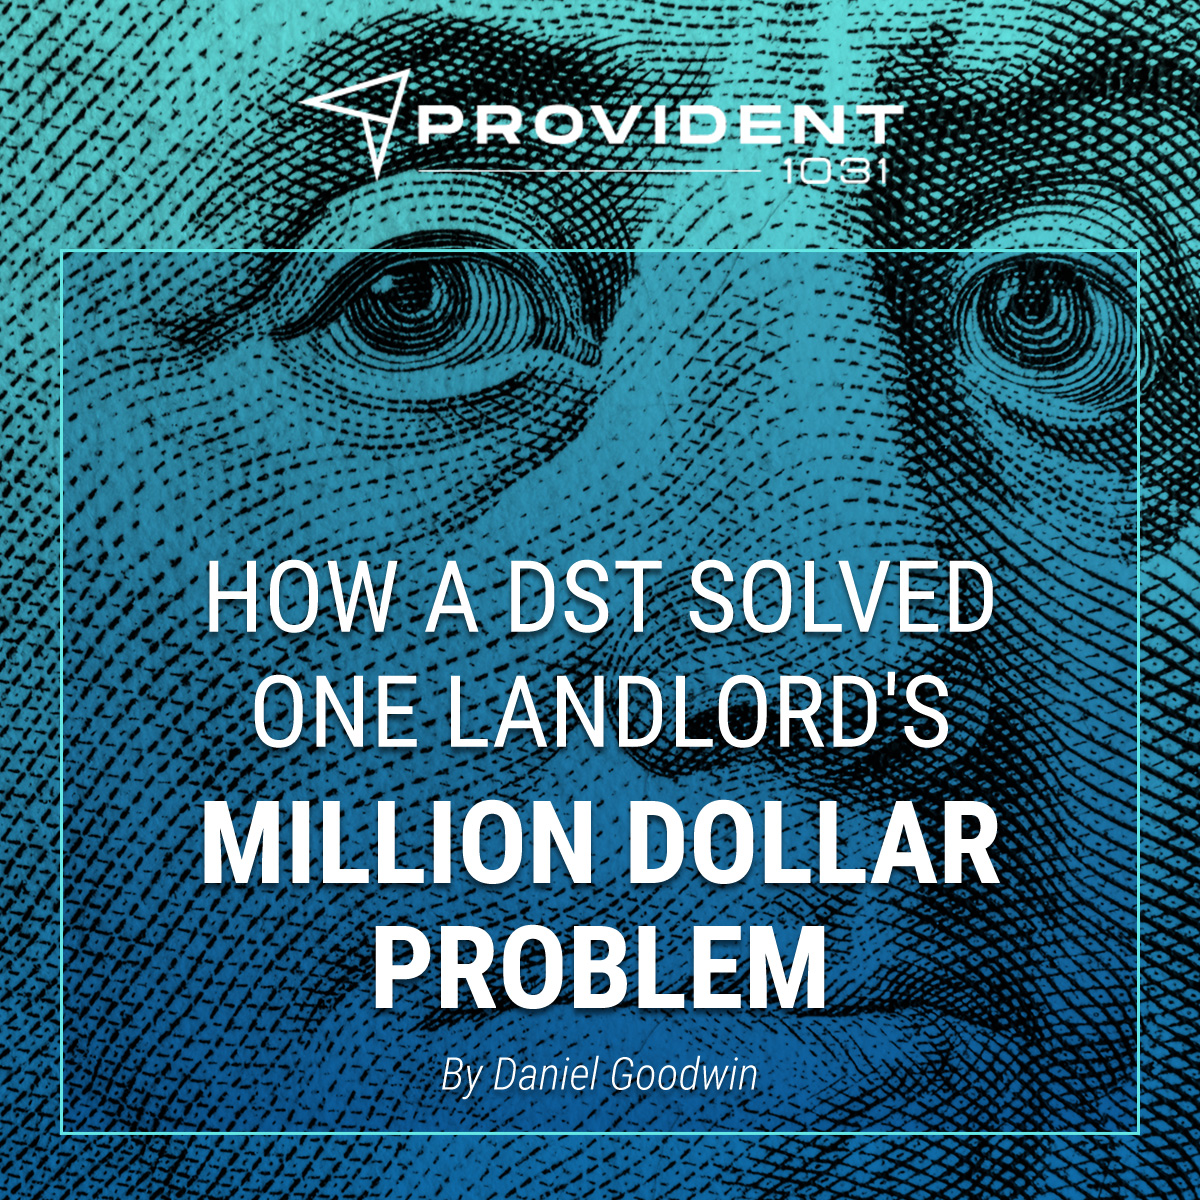 How A DST Solved One Landlord's Million Dollar Problem - Provident 1031